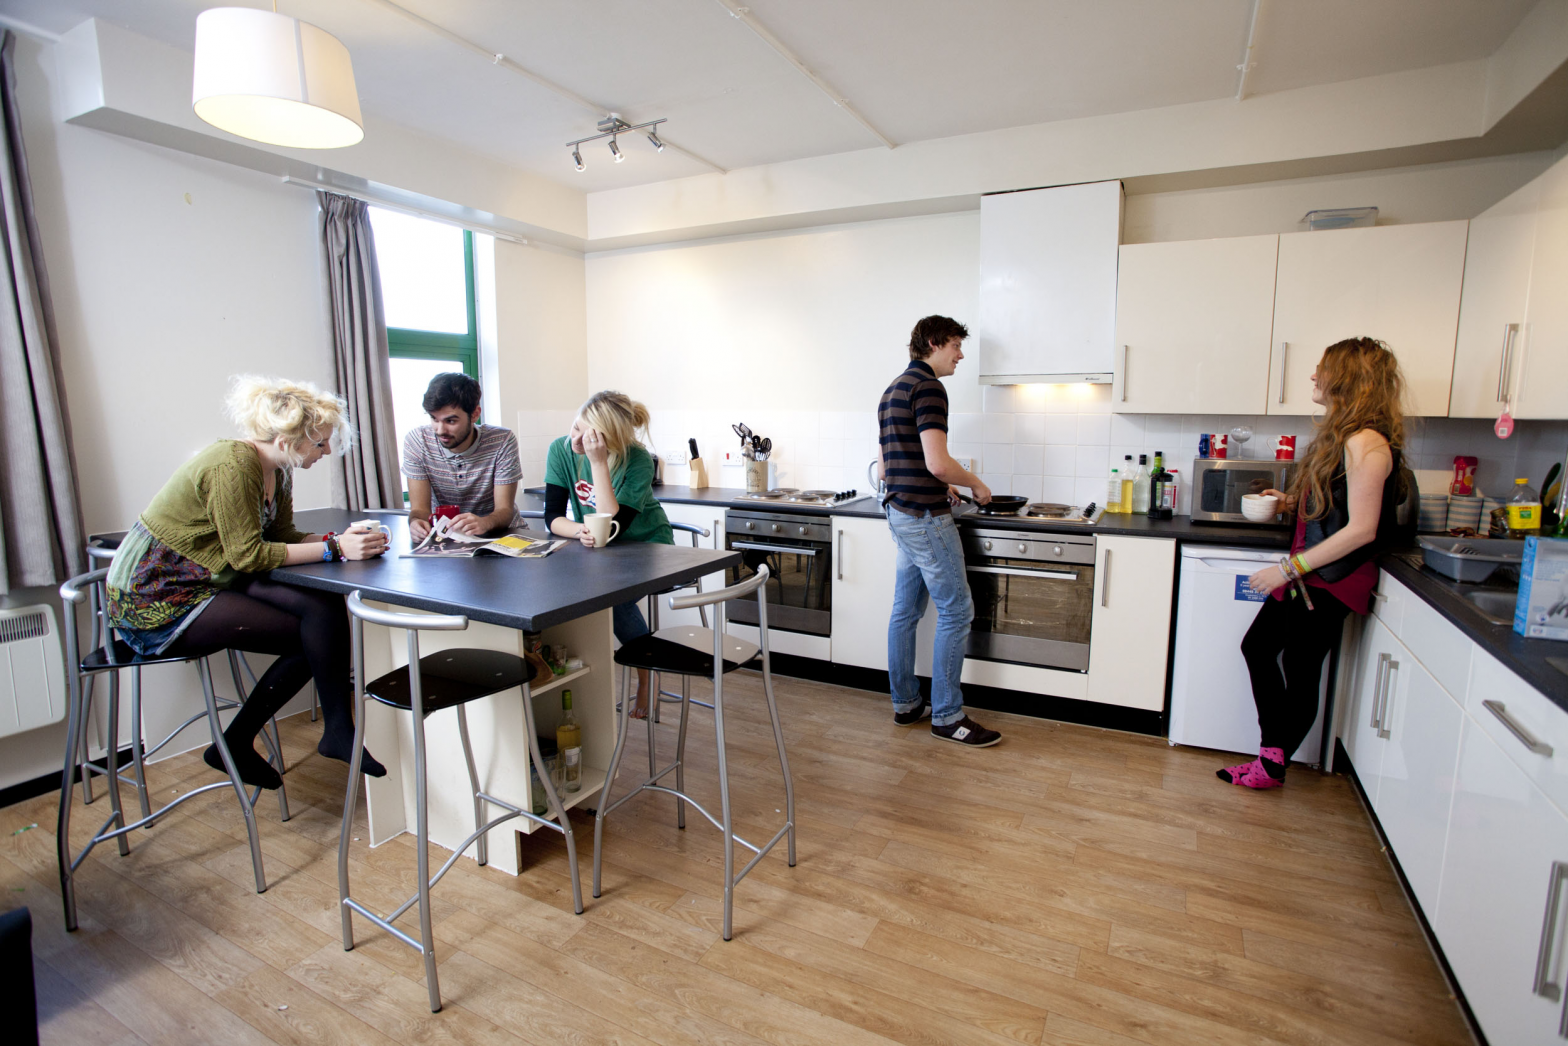 students cooking in the kitchen of a flat